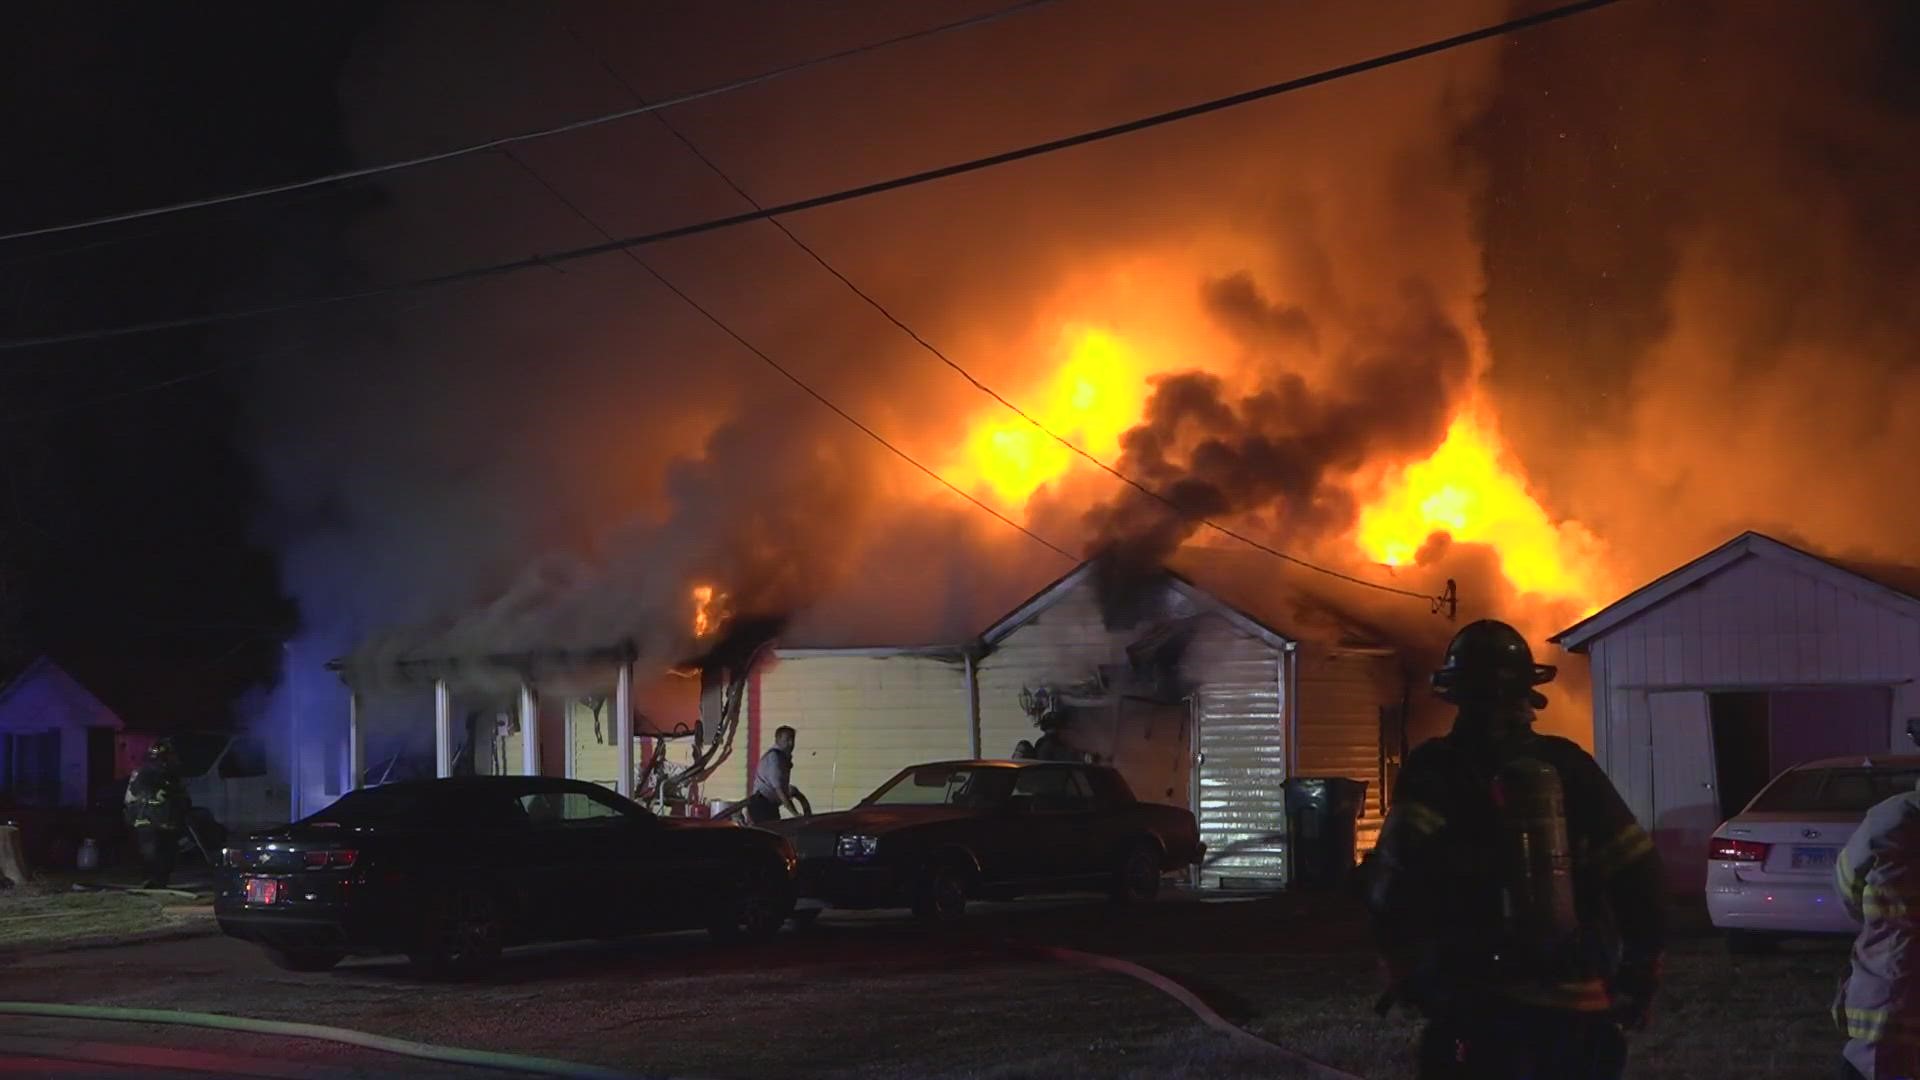 The home was fully engulfed in flames. It is not known if anyone was injured in the fire.